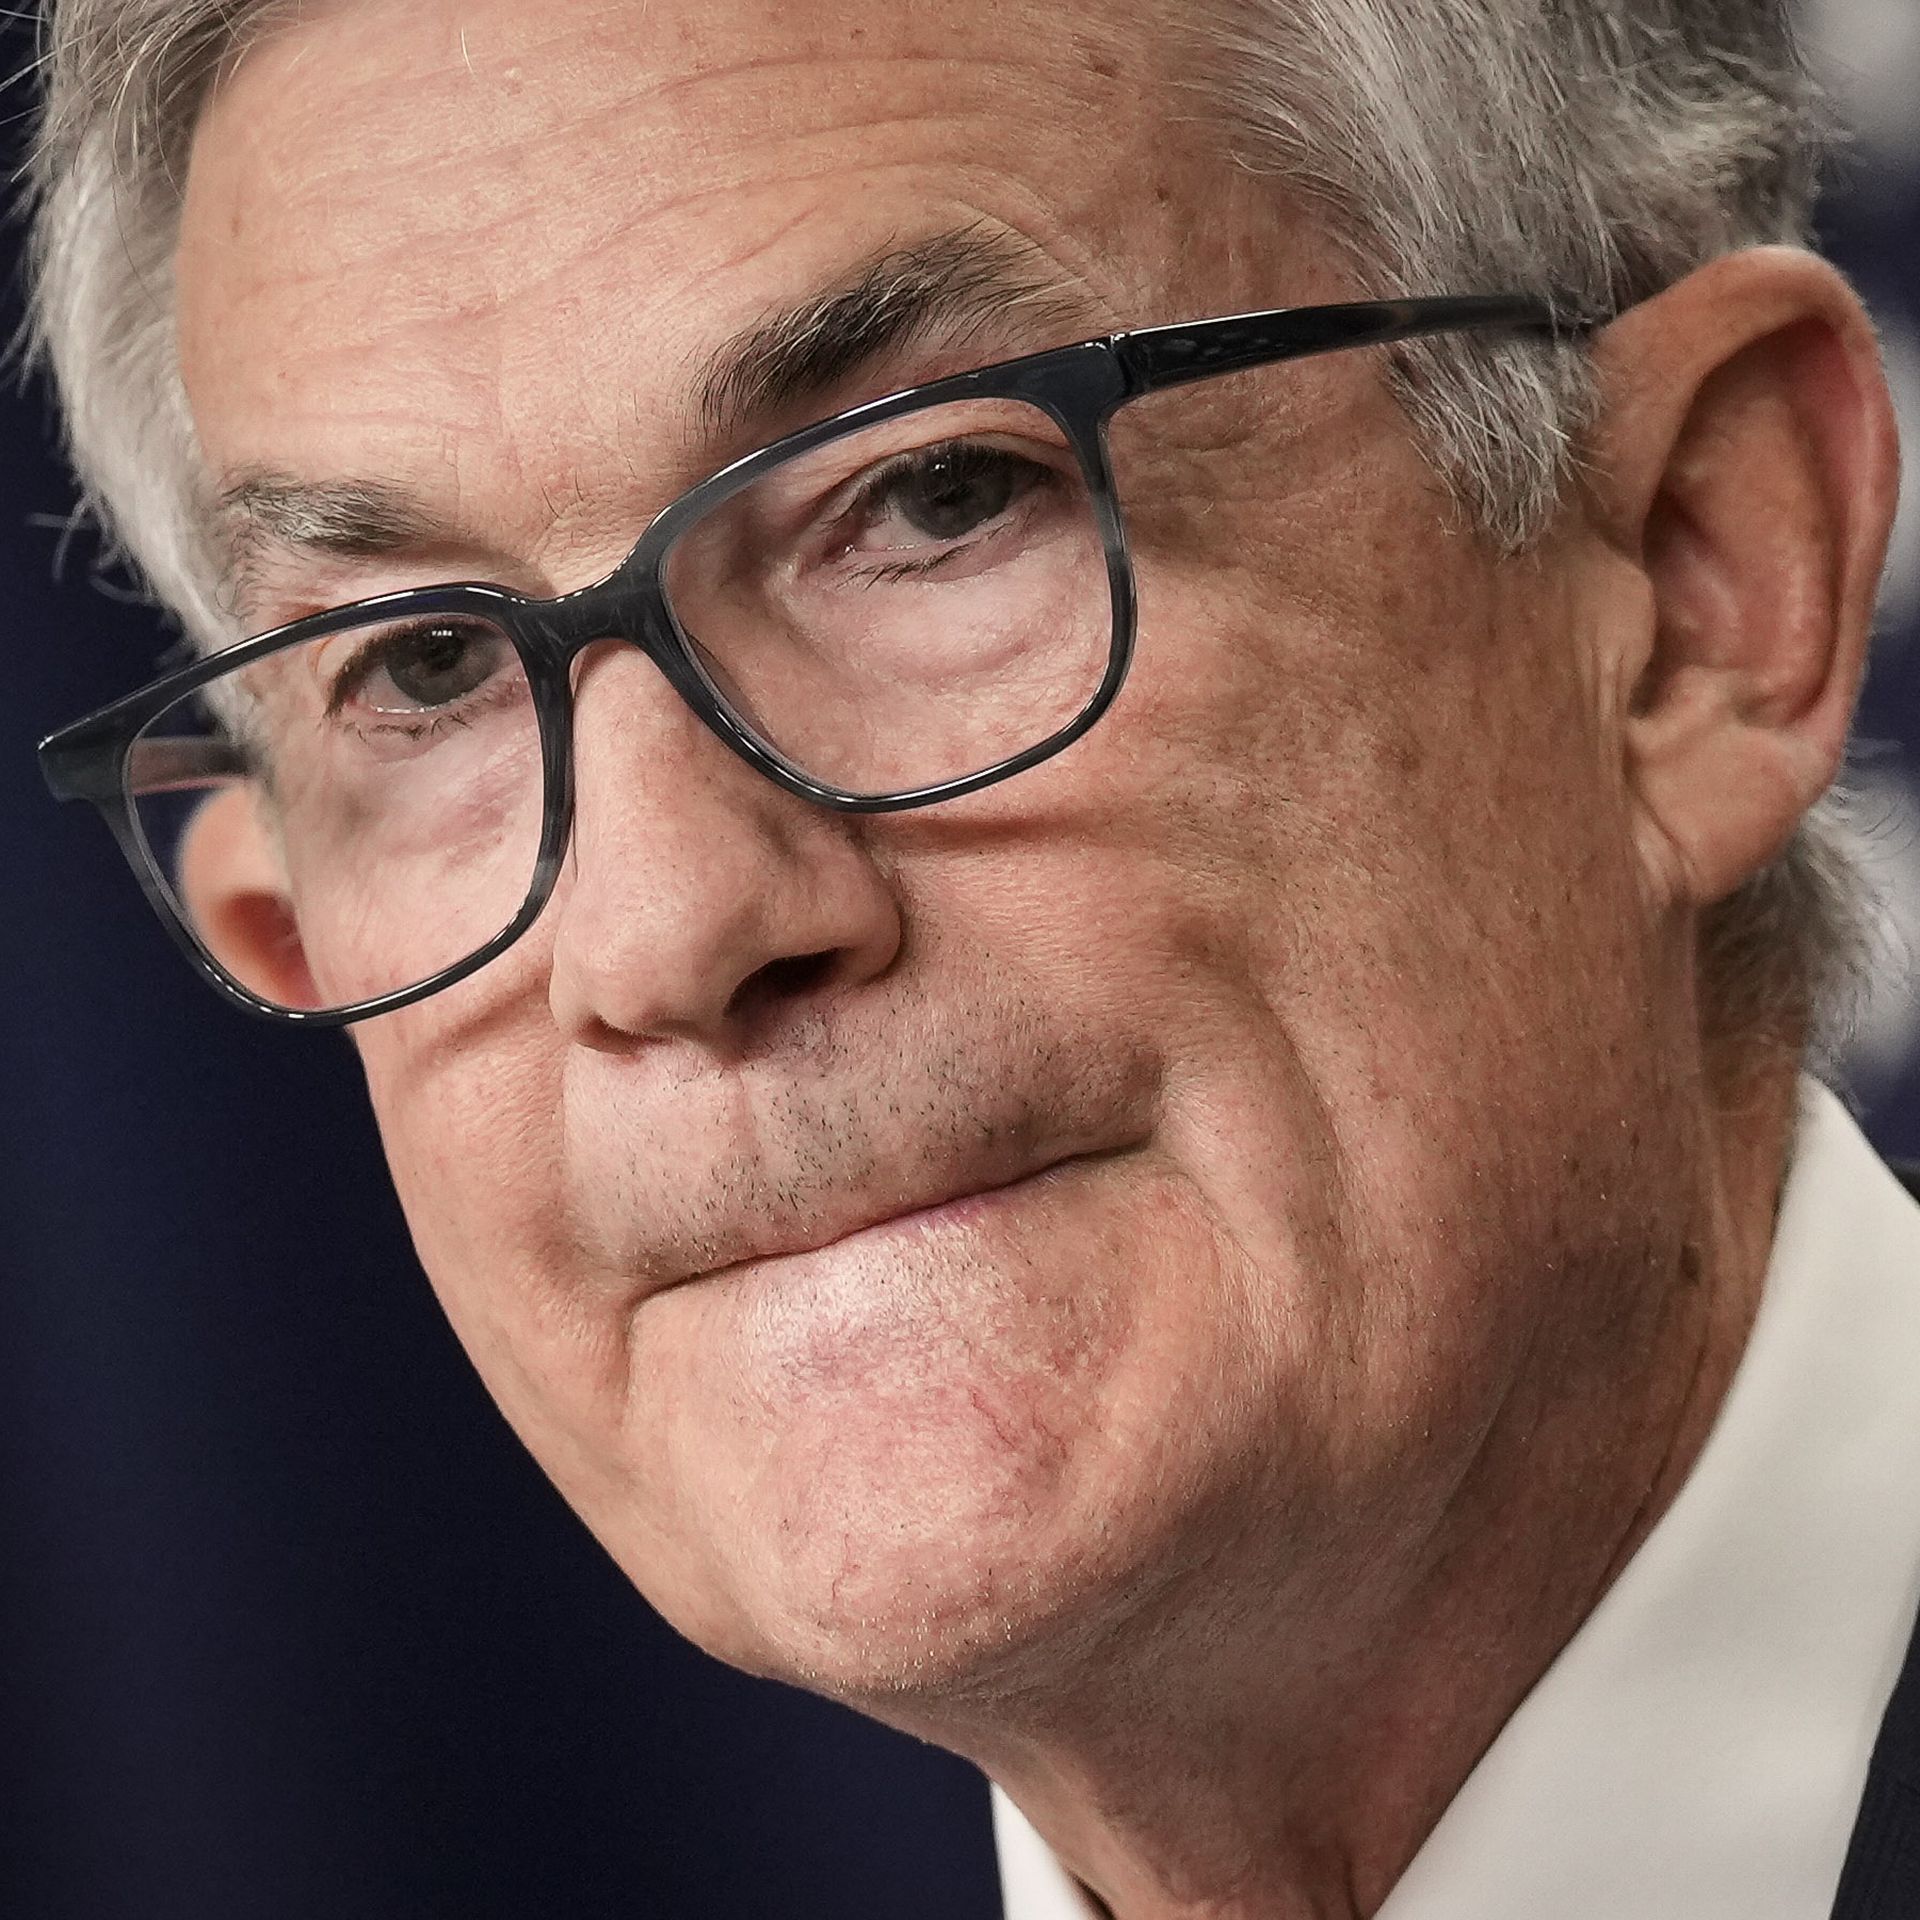 Fed chair Jerome Powell